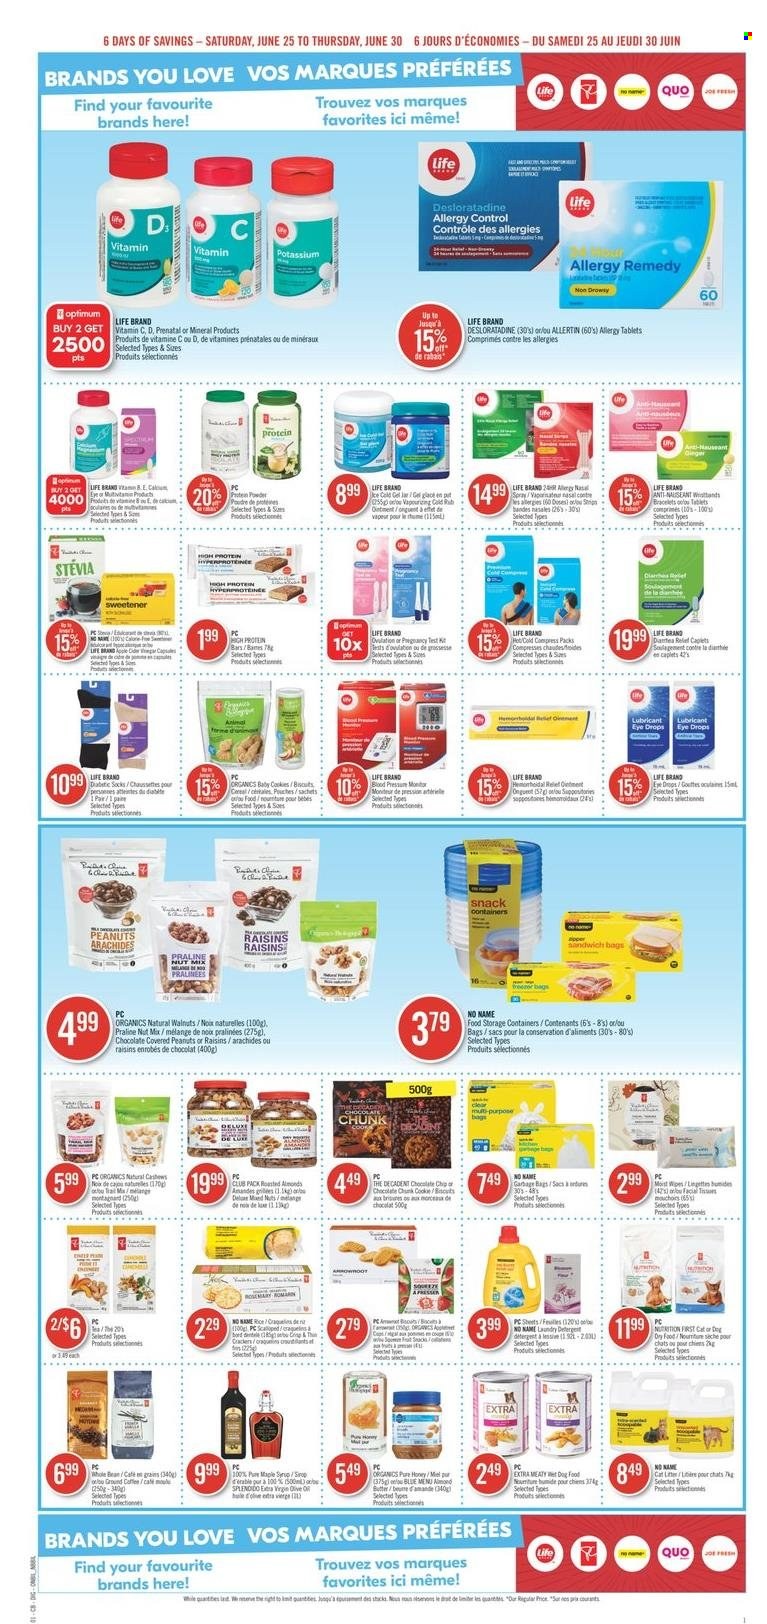 thumbnail - Shoppers Drug Mart Flyer - June 25, 2022 - June 30, 2022 - Sales products - No Name, butter, snack, stevia, sweetener, cereals, protein bar, ginger, rosemary, extra virgin olive oil, maple syrup, honey, syrup, almonds, cashews, walnuts, peanuts, coffee, ground coffee, wipes, ointment, toner, lubricant, bag, storage box, animal food, dog food, wet dog food, Optimum, socks, bracelet, multivitamin, vitamin c, Prenatal, eye drops, whey protein, pregnancy test, detergent. Page 14.